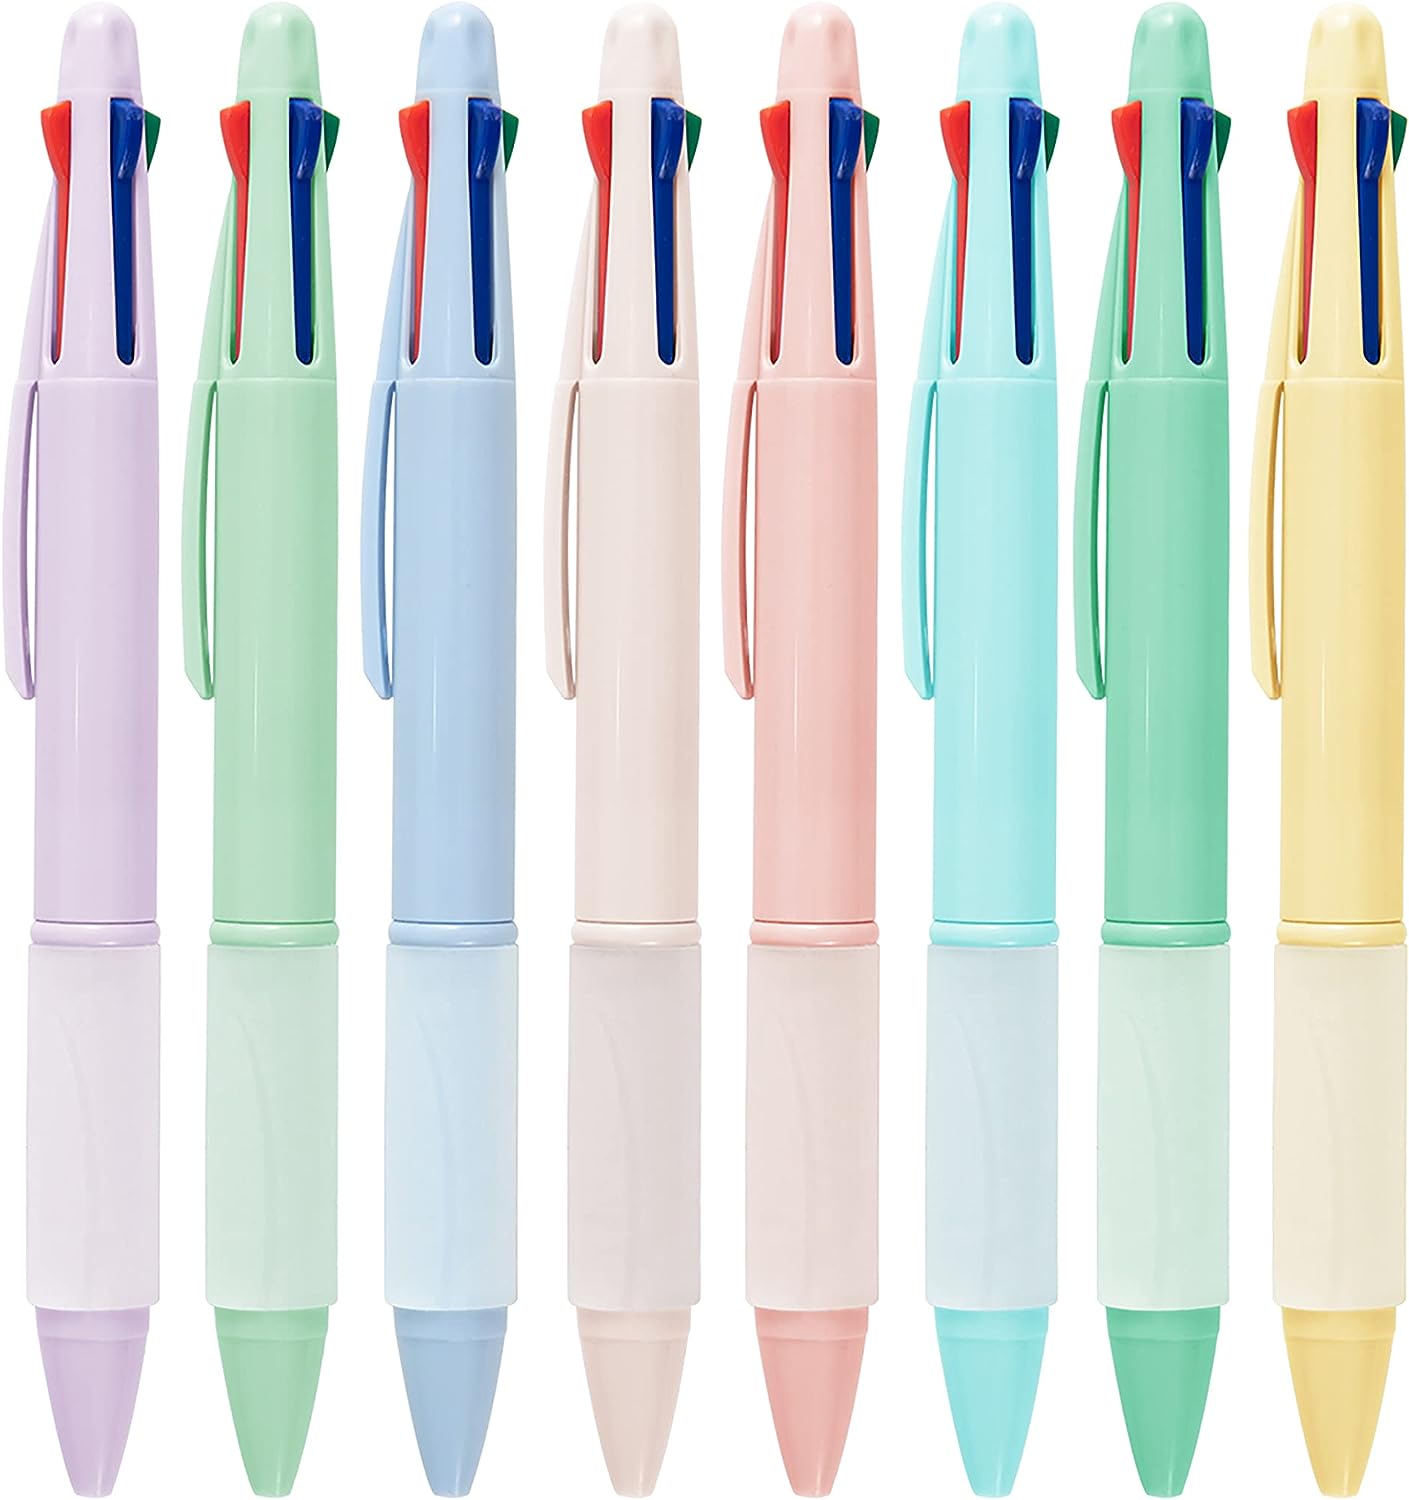 8 Pack BallPoint Multi Pens 4-in-1 Colored Pens (1.0mm)